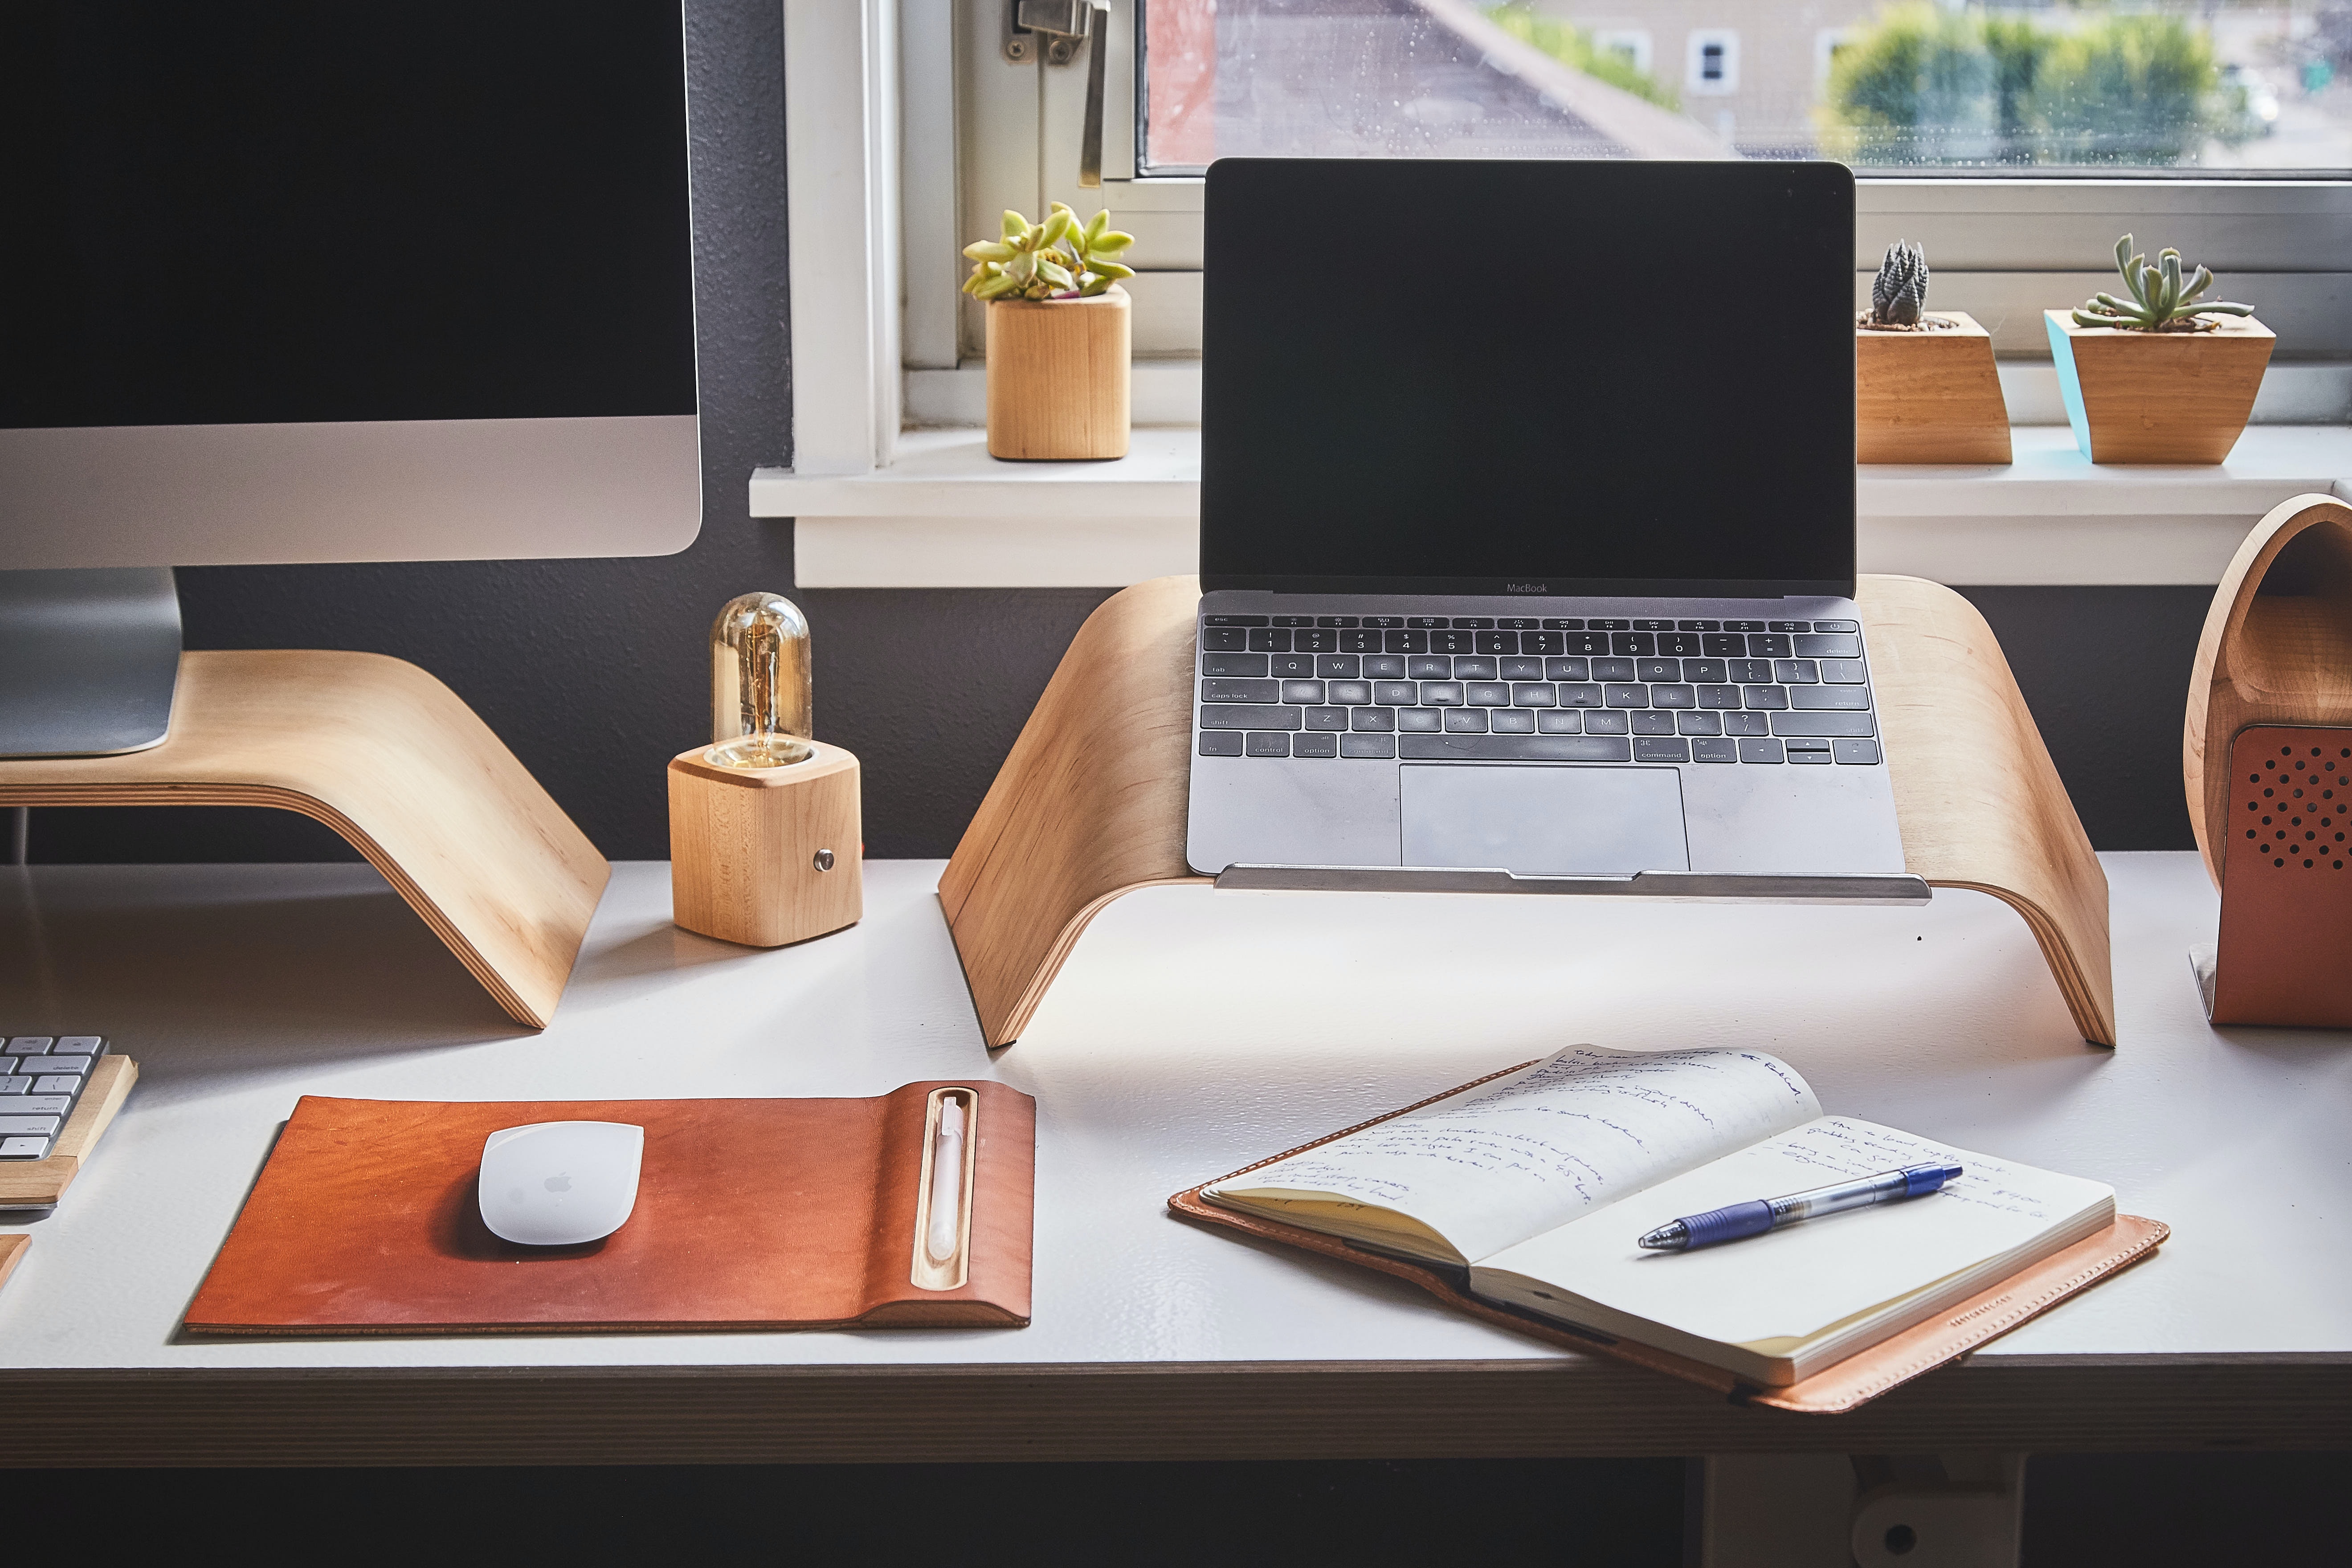 How to Set Up a Home Office to Maximize Productivity While Working Remotely